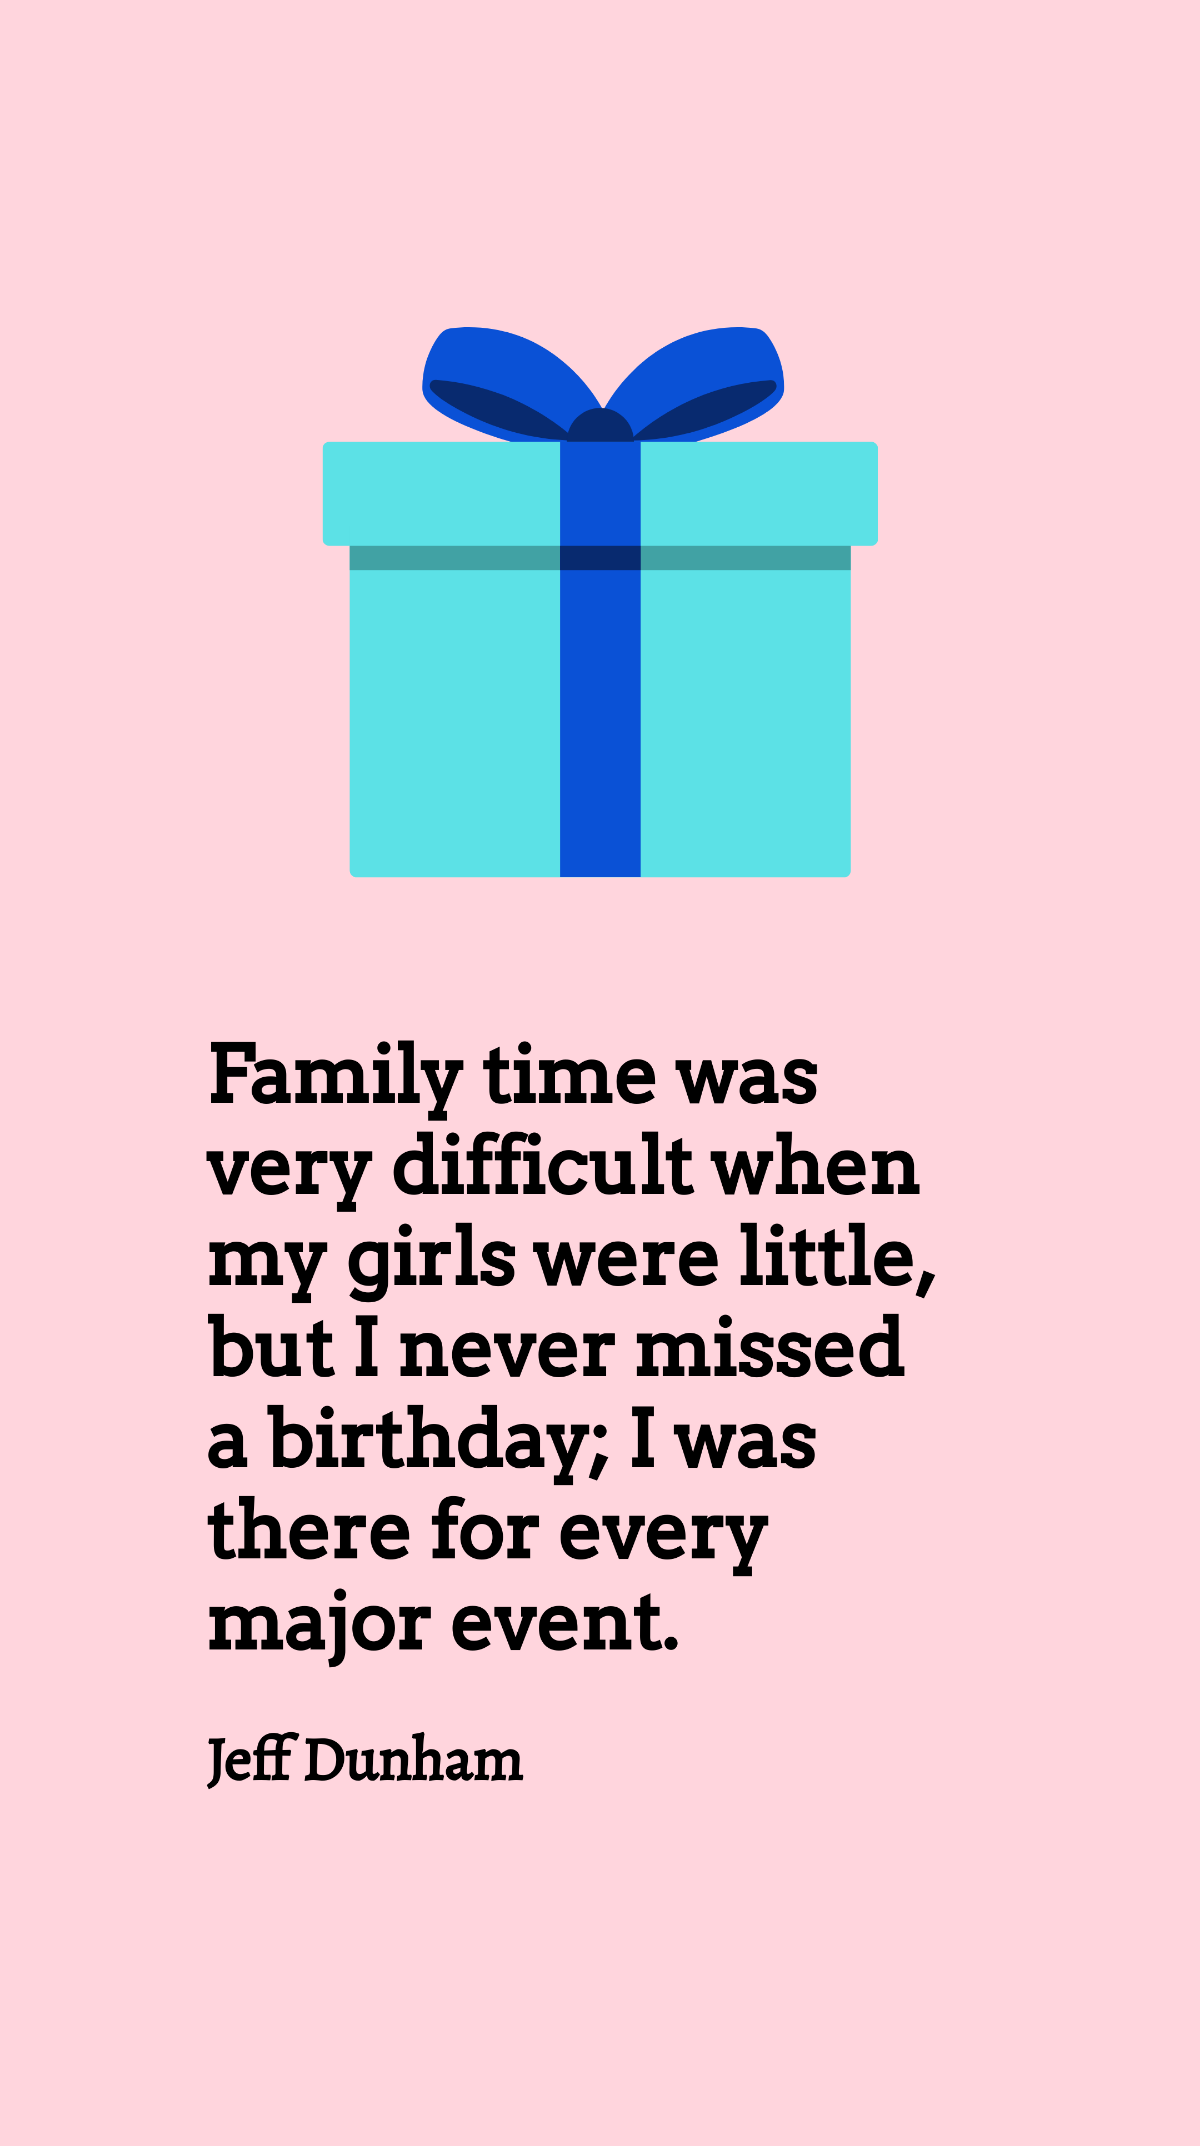 Jeff Dunham - Family time was very difficult when my girls were little, but I never missed a birthday; I was there for every major event. Template